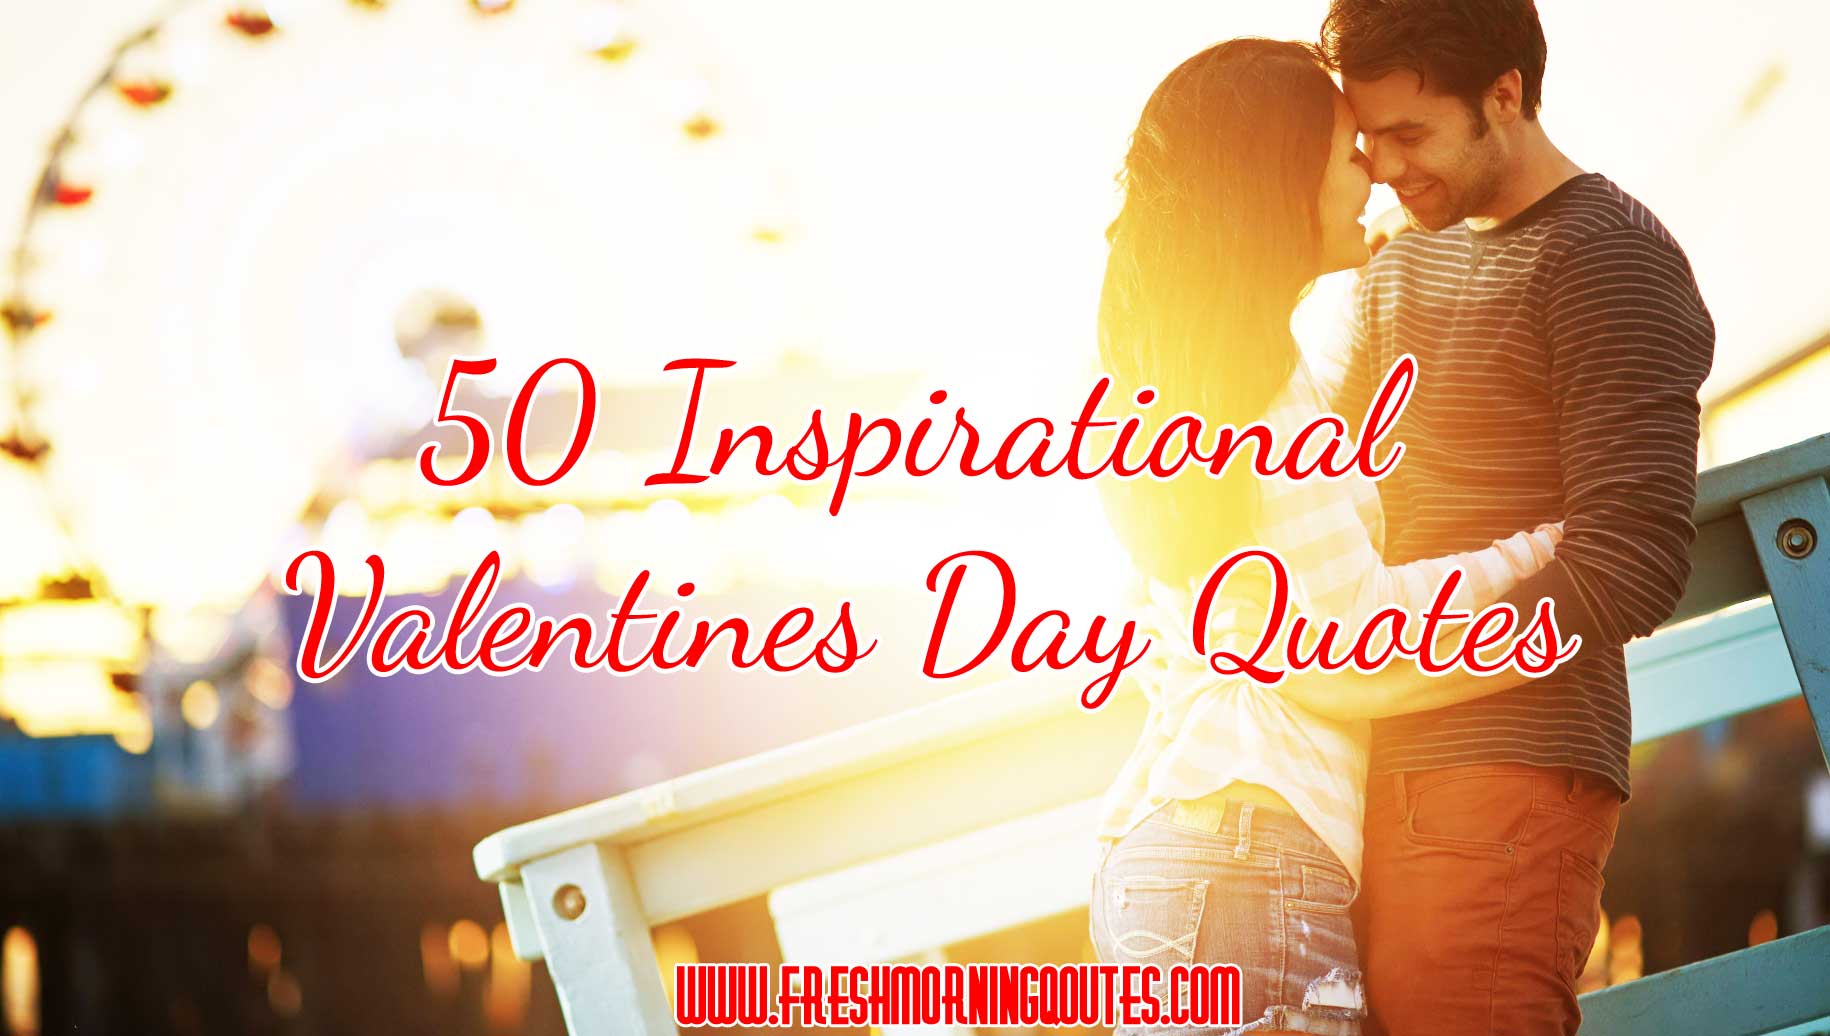 50 Inspirational Valentines Day Quotes - Freshmorningquotes1830 x 1036